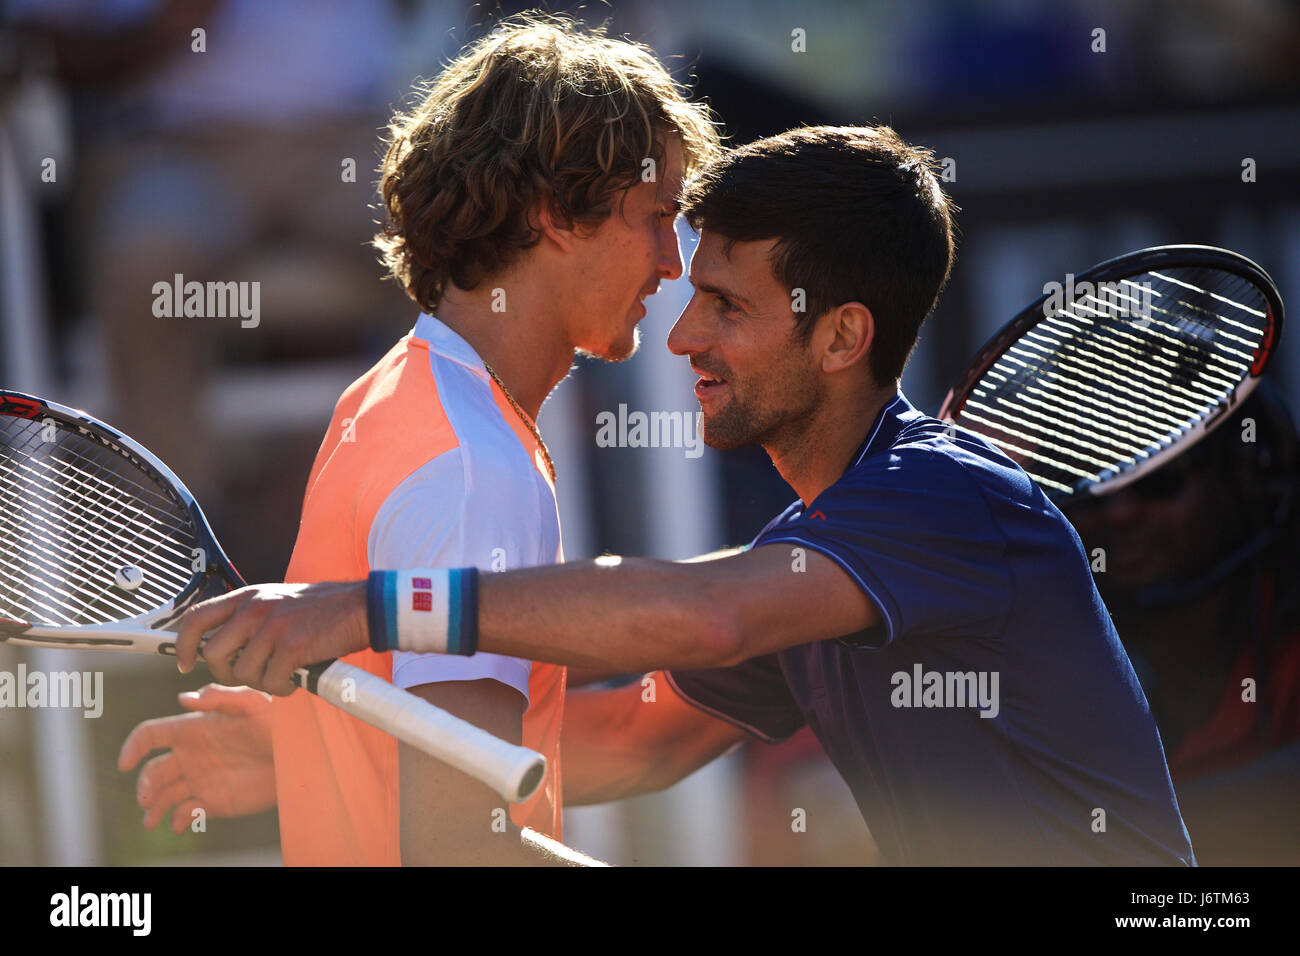 Rome, Italy. 21st May, 2017. Novak Djokovic (R) of Serbia hugs Alexander  Zverev of Germany at the end of their final match of men's singles at the  Italian Open tennis tournament in